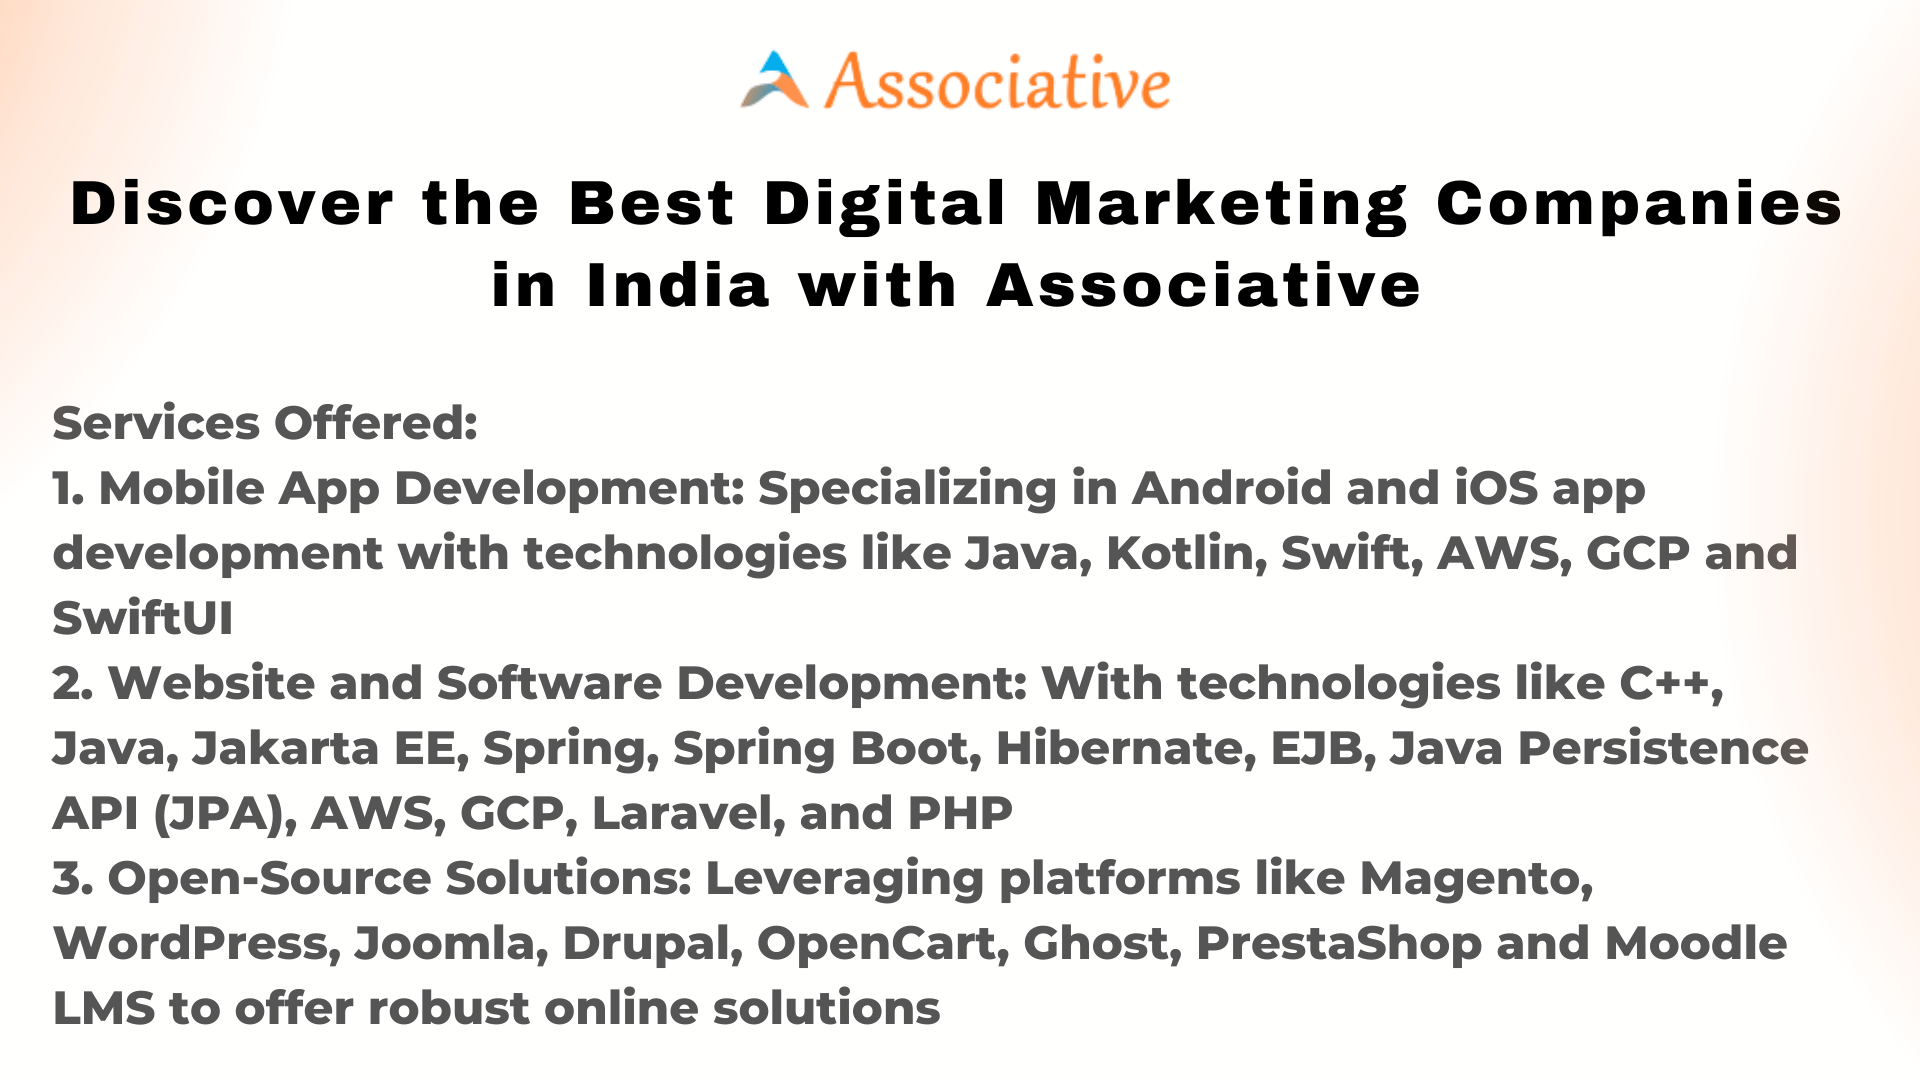 Discover the Best Digital Marketing Companies in India with Associative